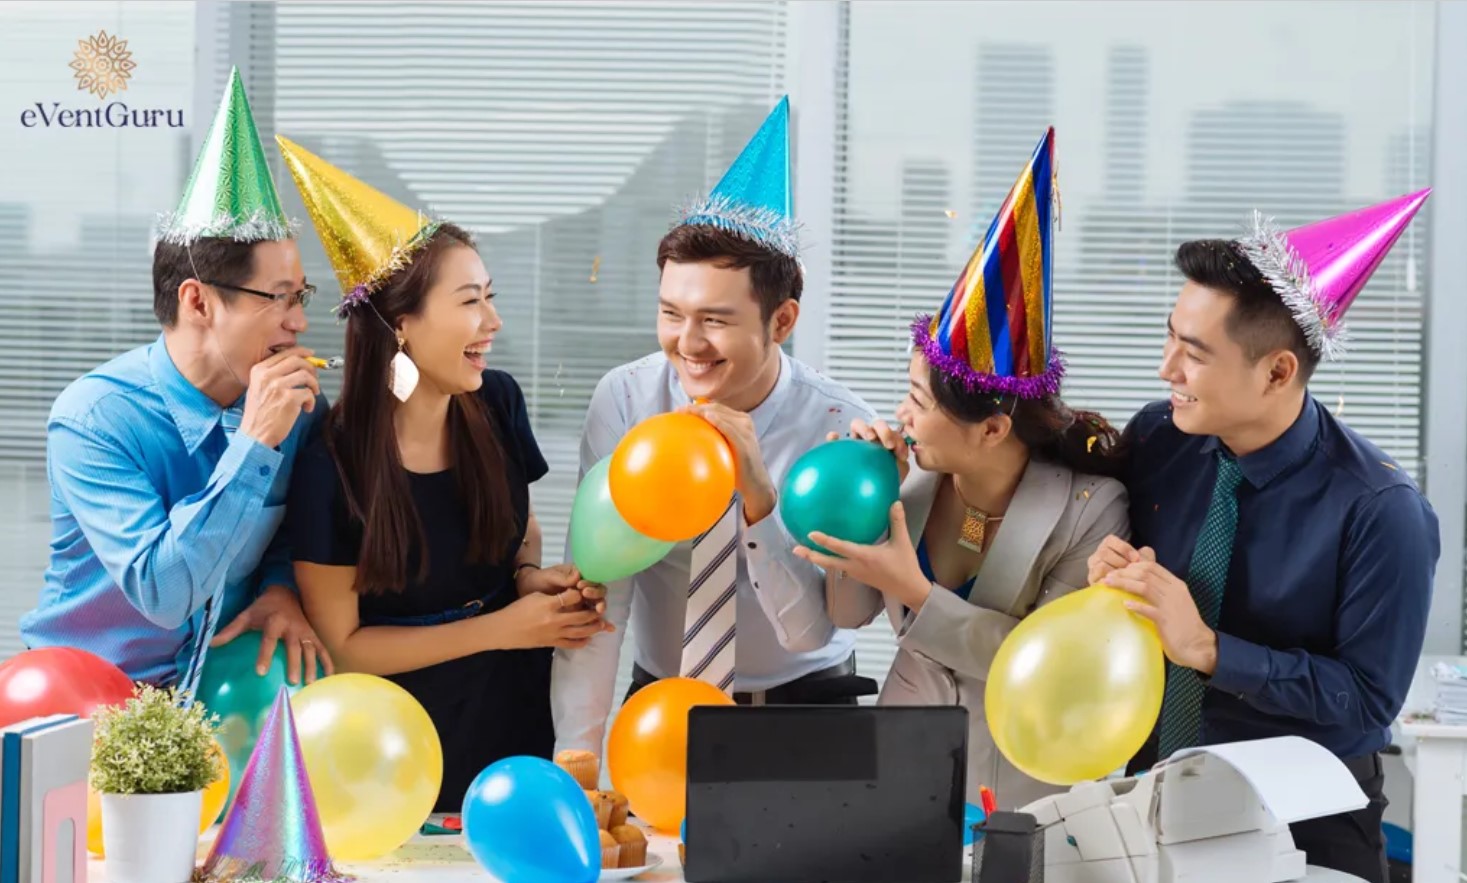 What to Do with Balloons at Corporate Events?